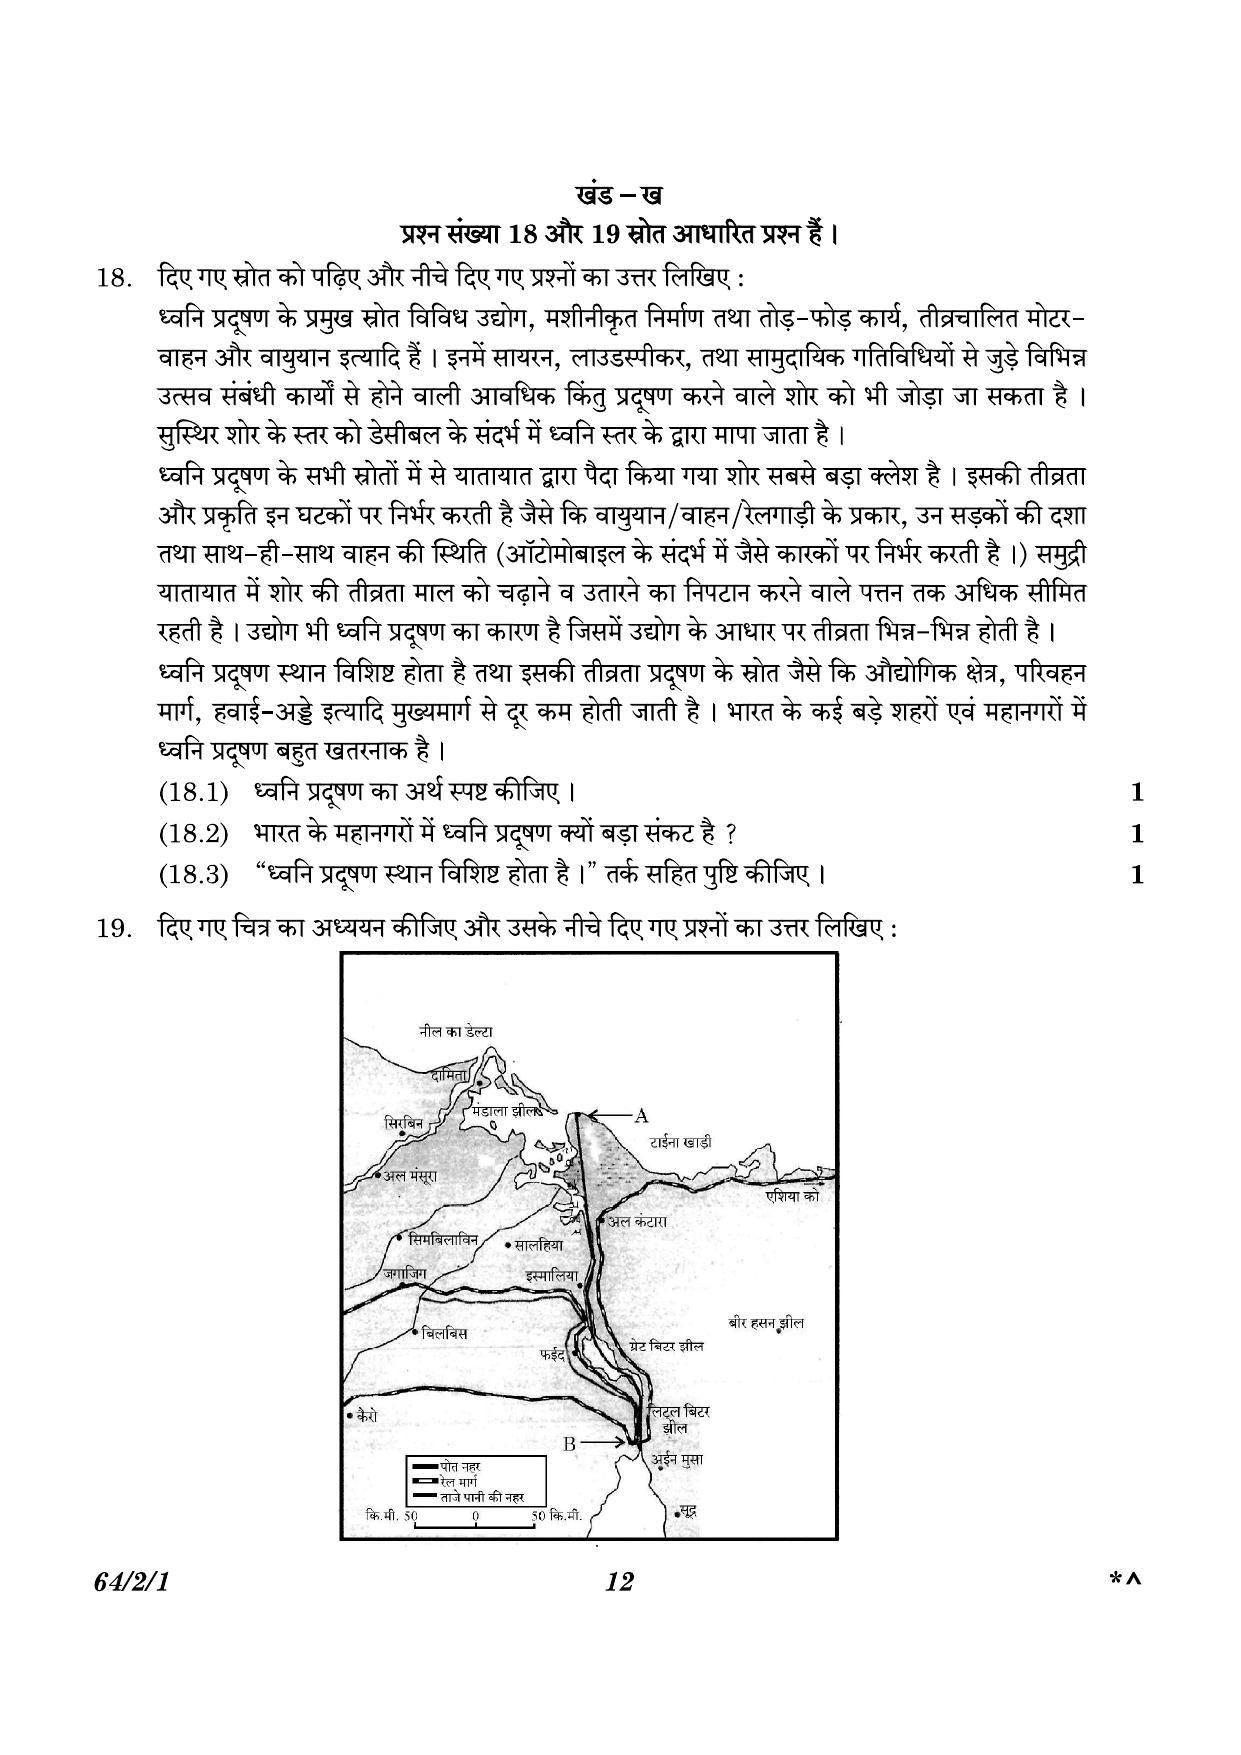 CBSE Class 12 64-2-1 Geography 2023 Question Paper - Page 12